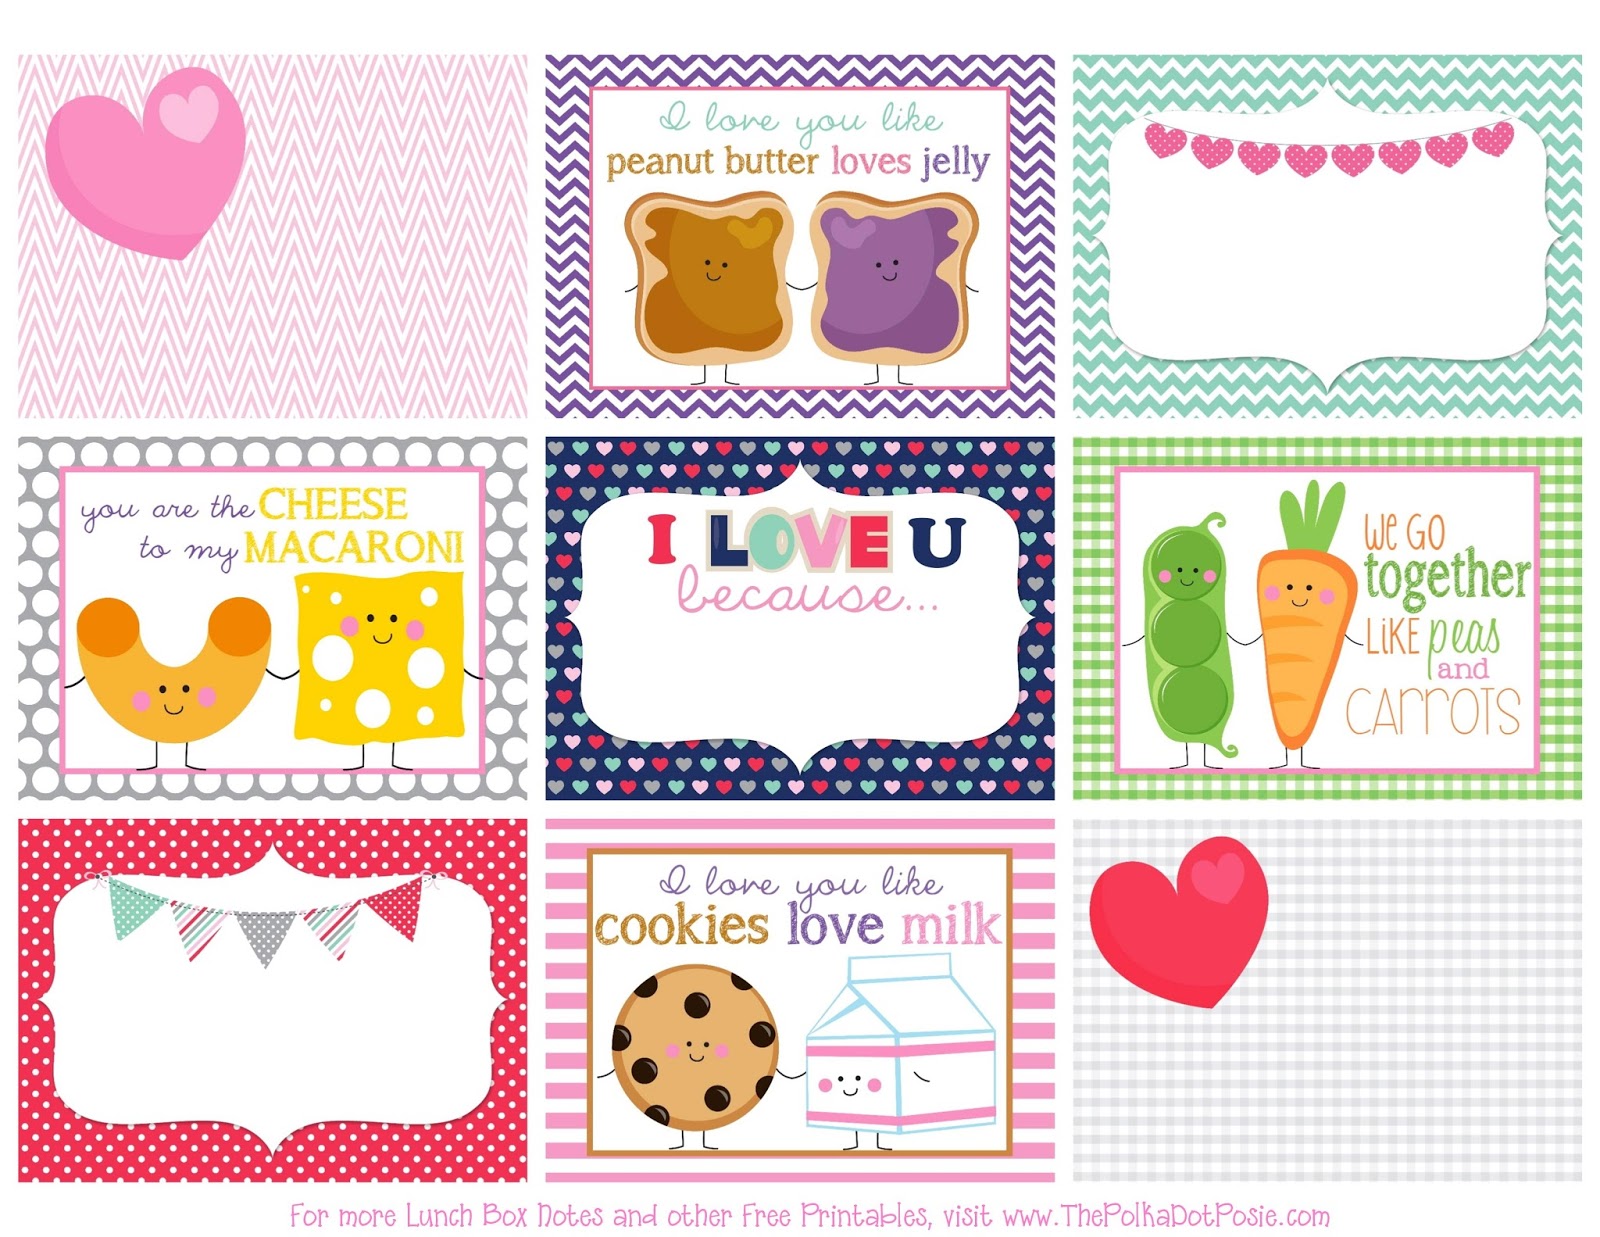 The Polka Dot Posie: Printable Valentine's Day Lunch Box Notes1600 x 1237